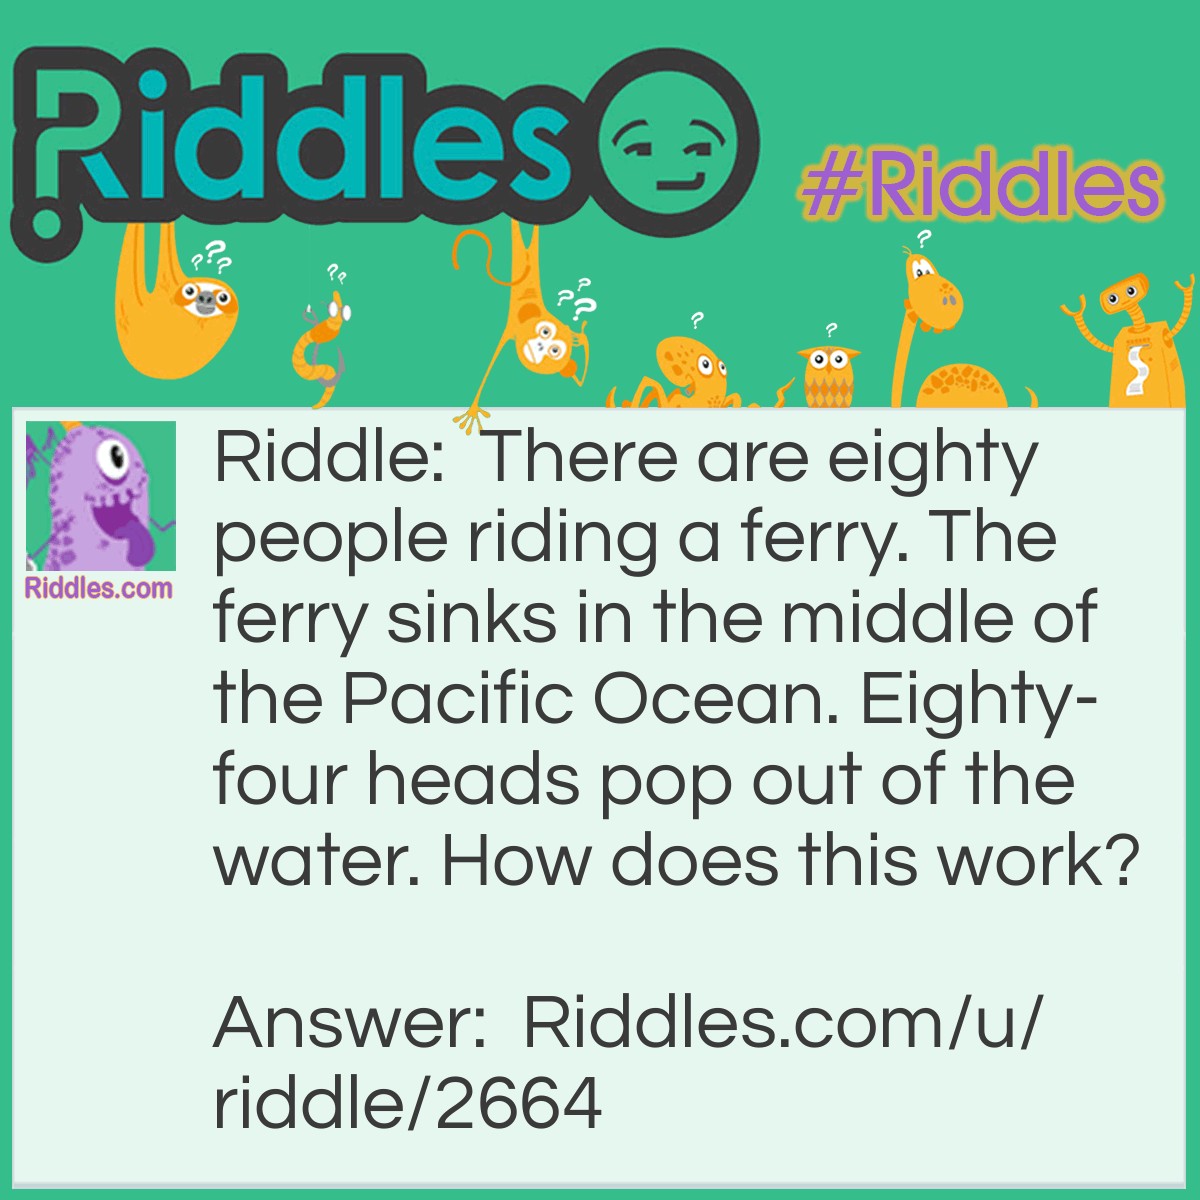 Riddle: There are eighty people riding a ferry. The ferry sinks in the middle of the Pacific Ocean. Eighty-four heads pop out of the water. How does this work? Answer: It's not eighty-four heads, it's eighty foreheads. I bet I got you there.